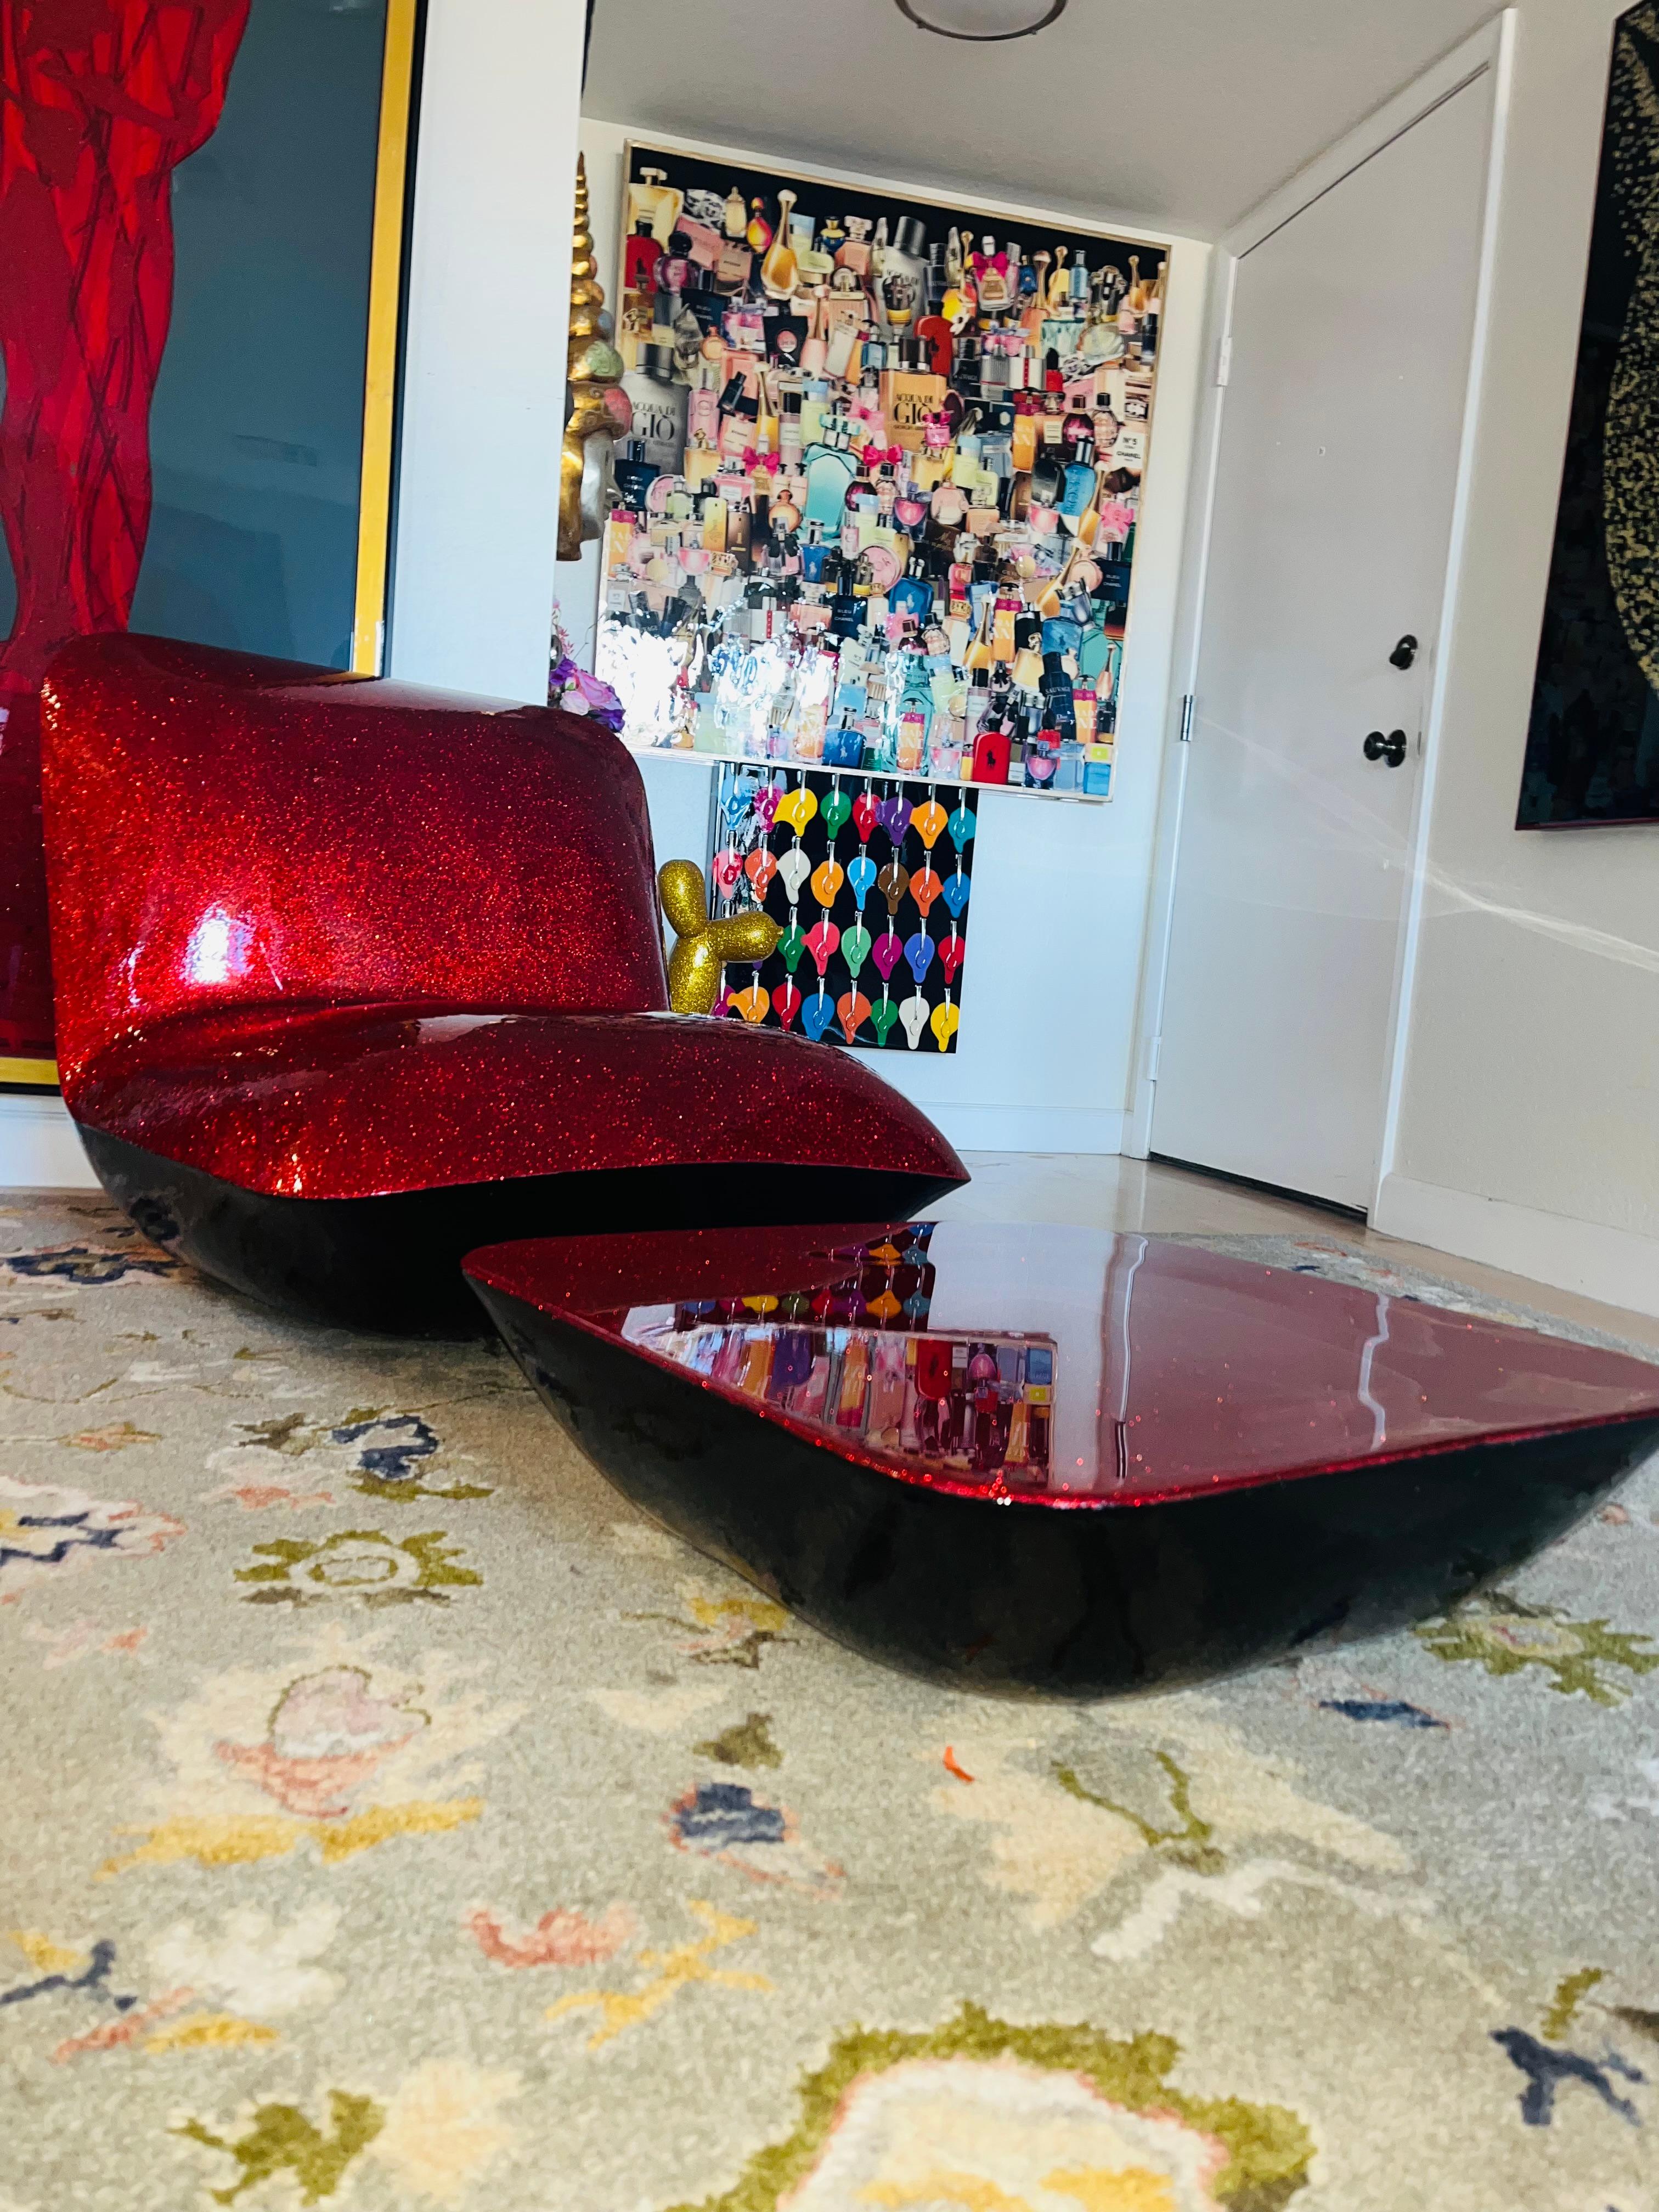 HARD CANDY GLITTER CHAIR WITH OTTOMAN I (One Of a Kind Functional Art) - Modern Sculpture by Mauro Oliveira